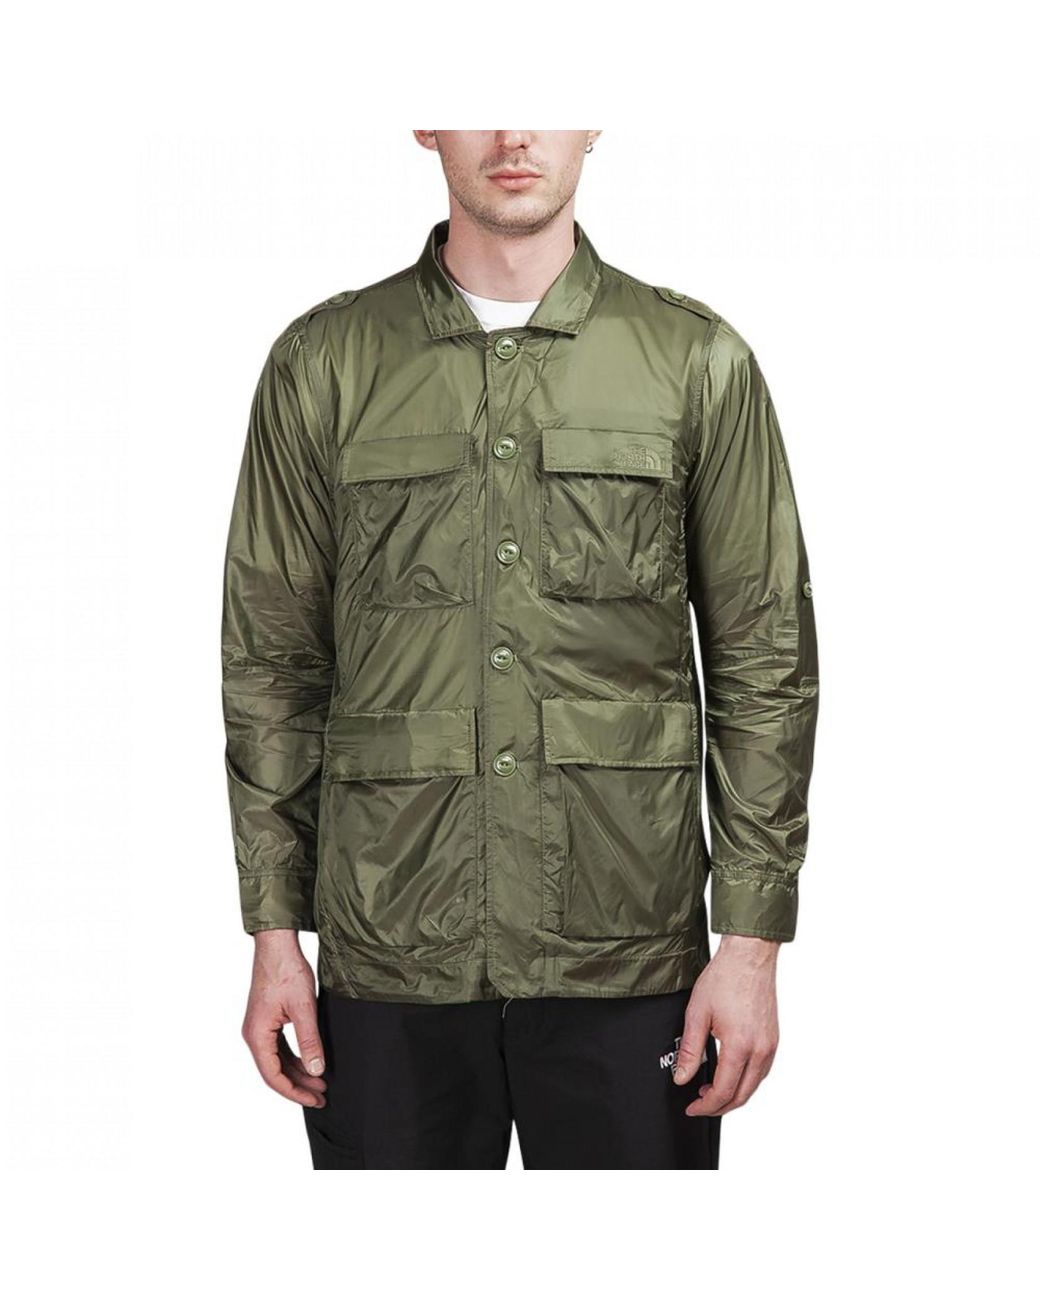 THE NORTH FACE BLACK SERIES Urban Safari Jacket in Olive (Green 